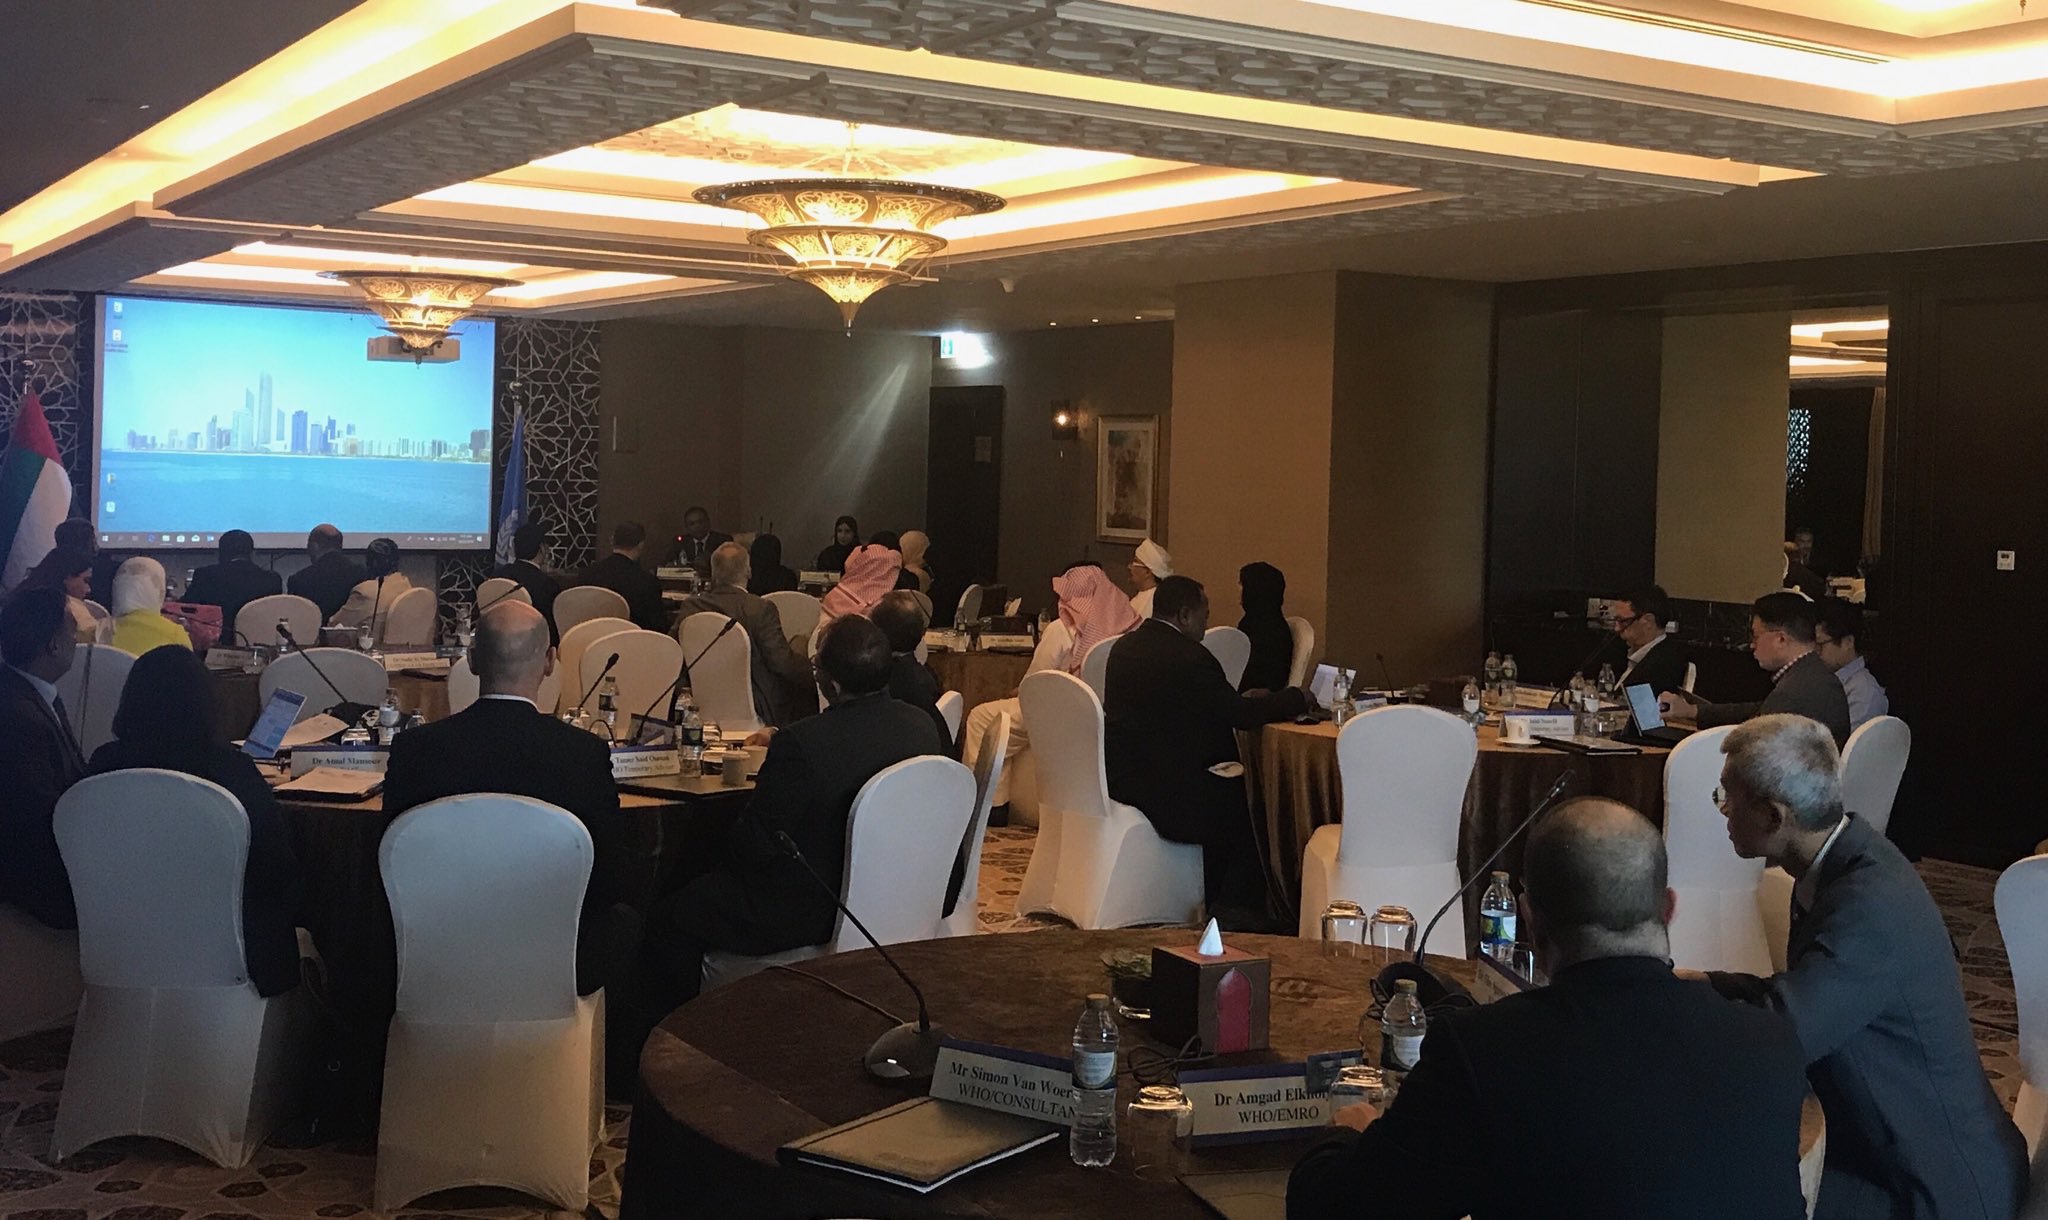  MERS experts convened in Abu Dhabi from 23 to 25 October 2018 to exchange expertise and discuss the establishment of an expert pool (Photo: Lubna Al Ariqi/WHO)